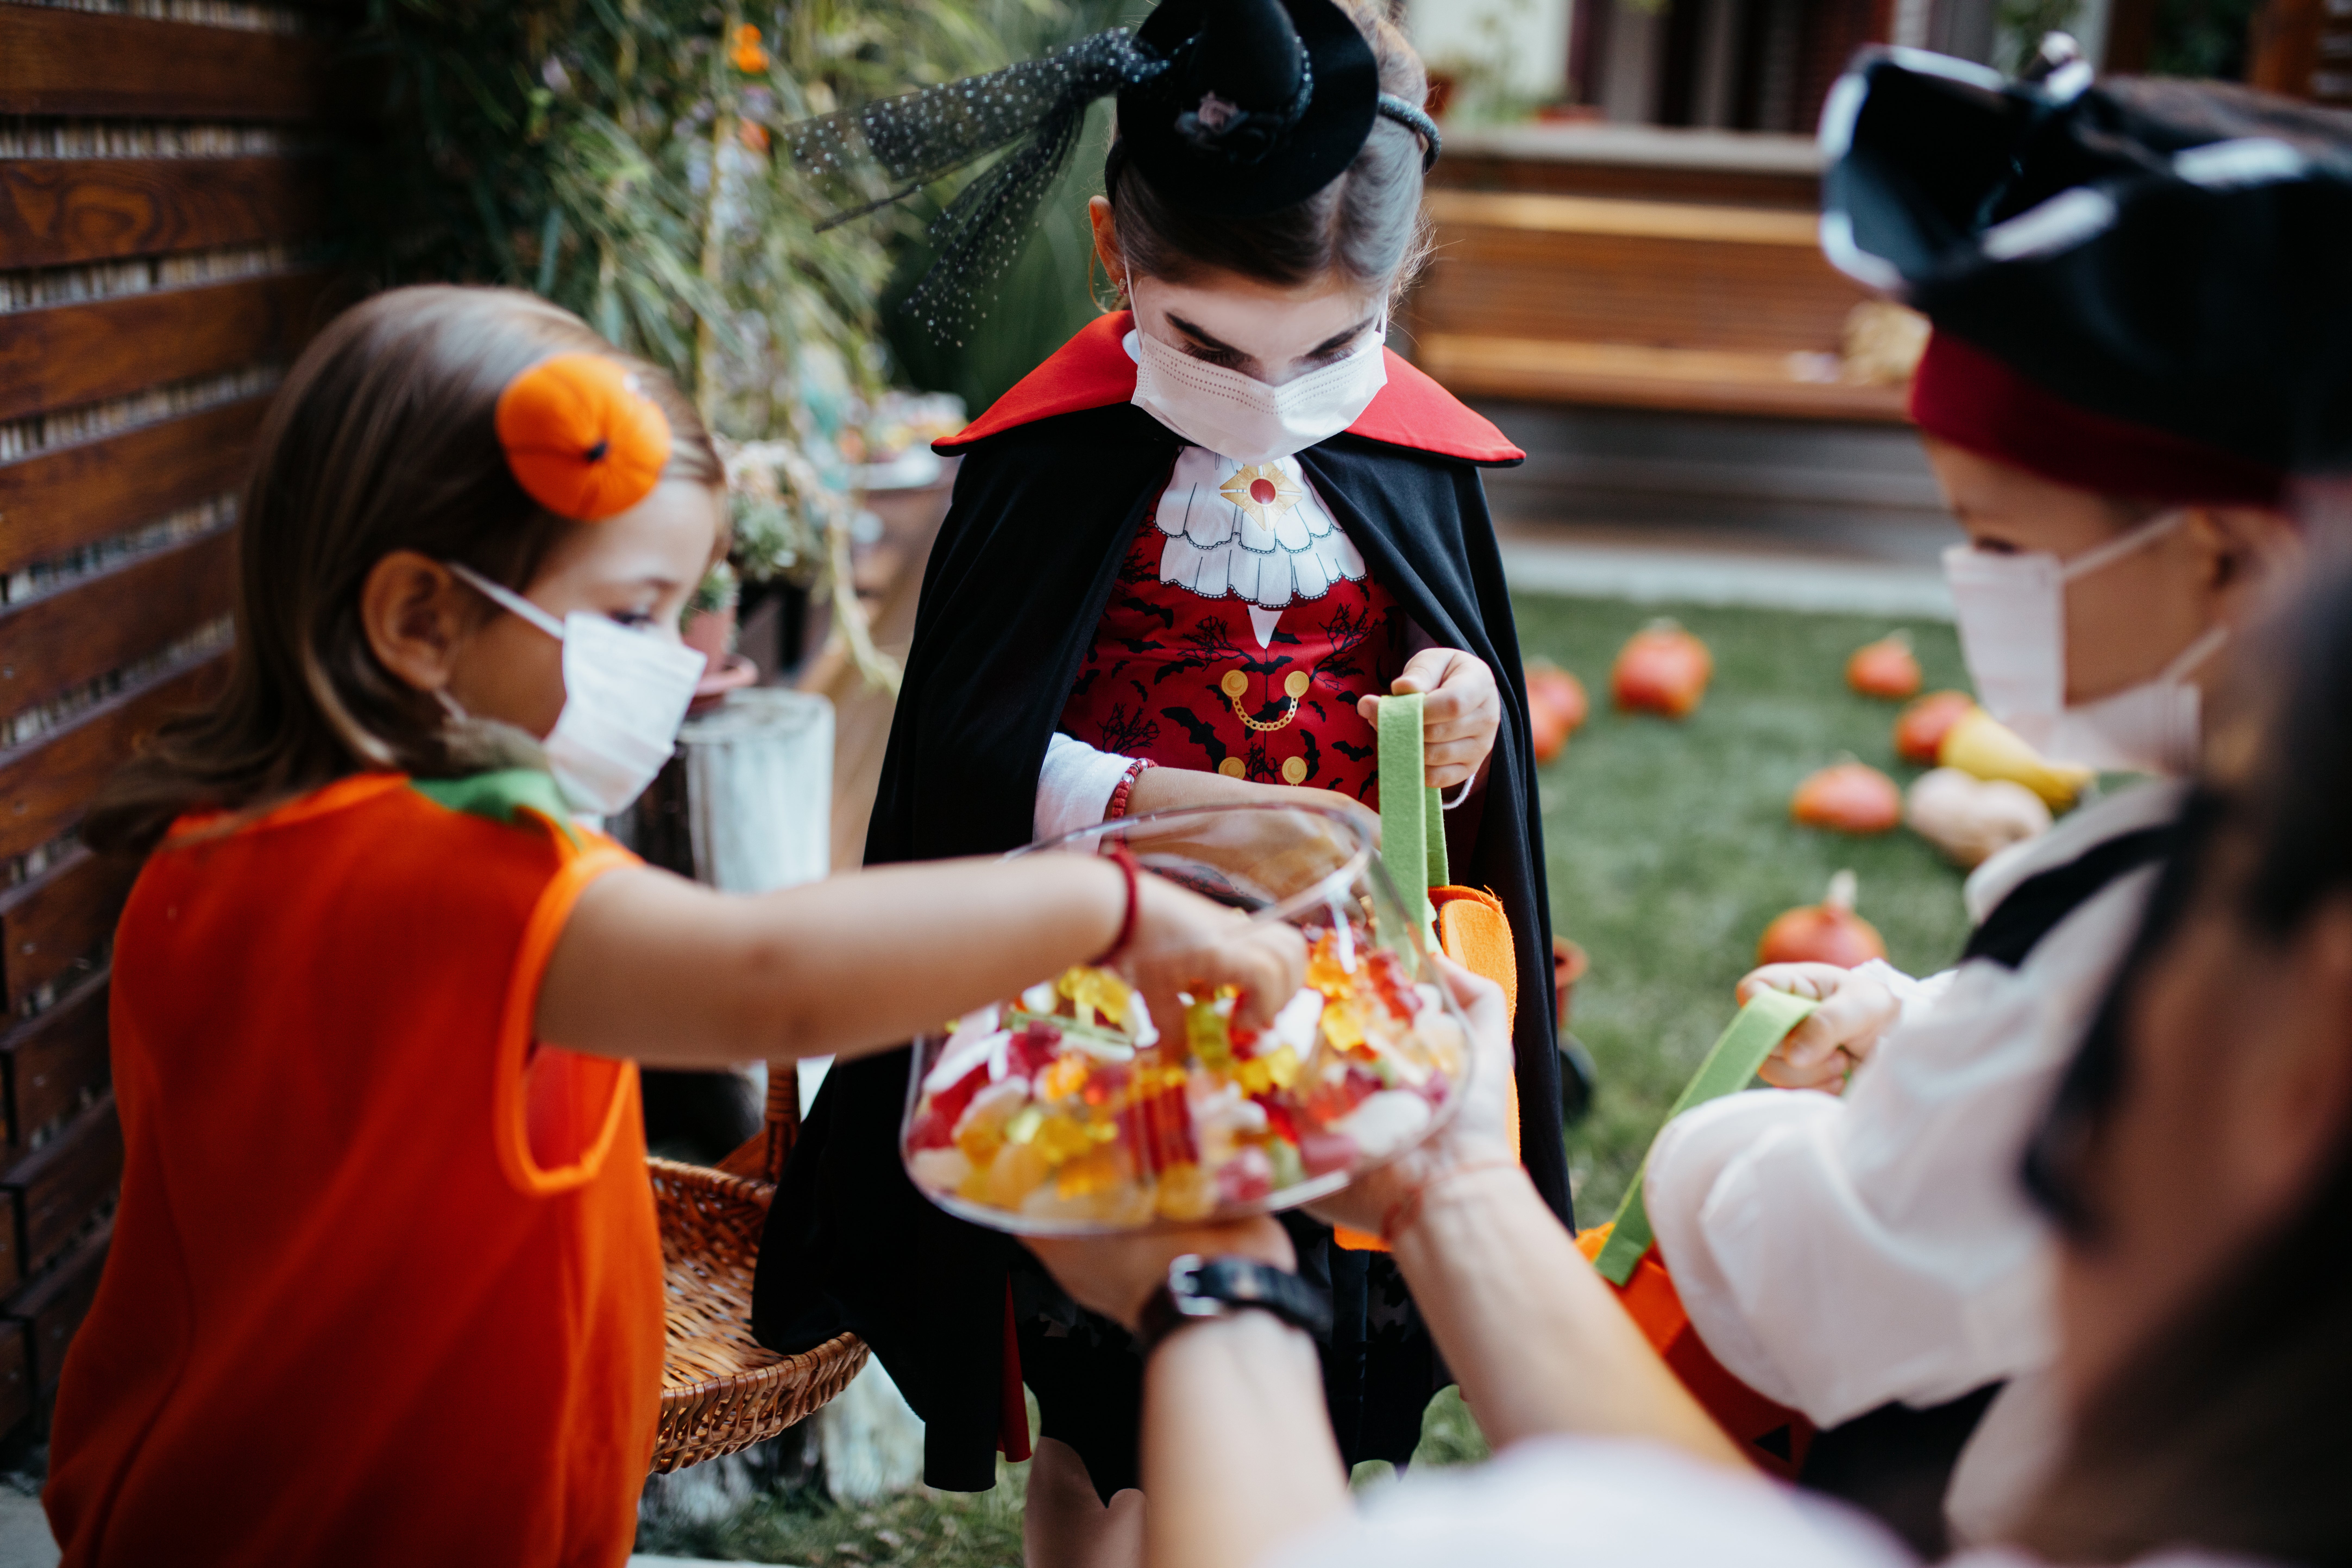 Should you trick-or-treat this year?